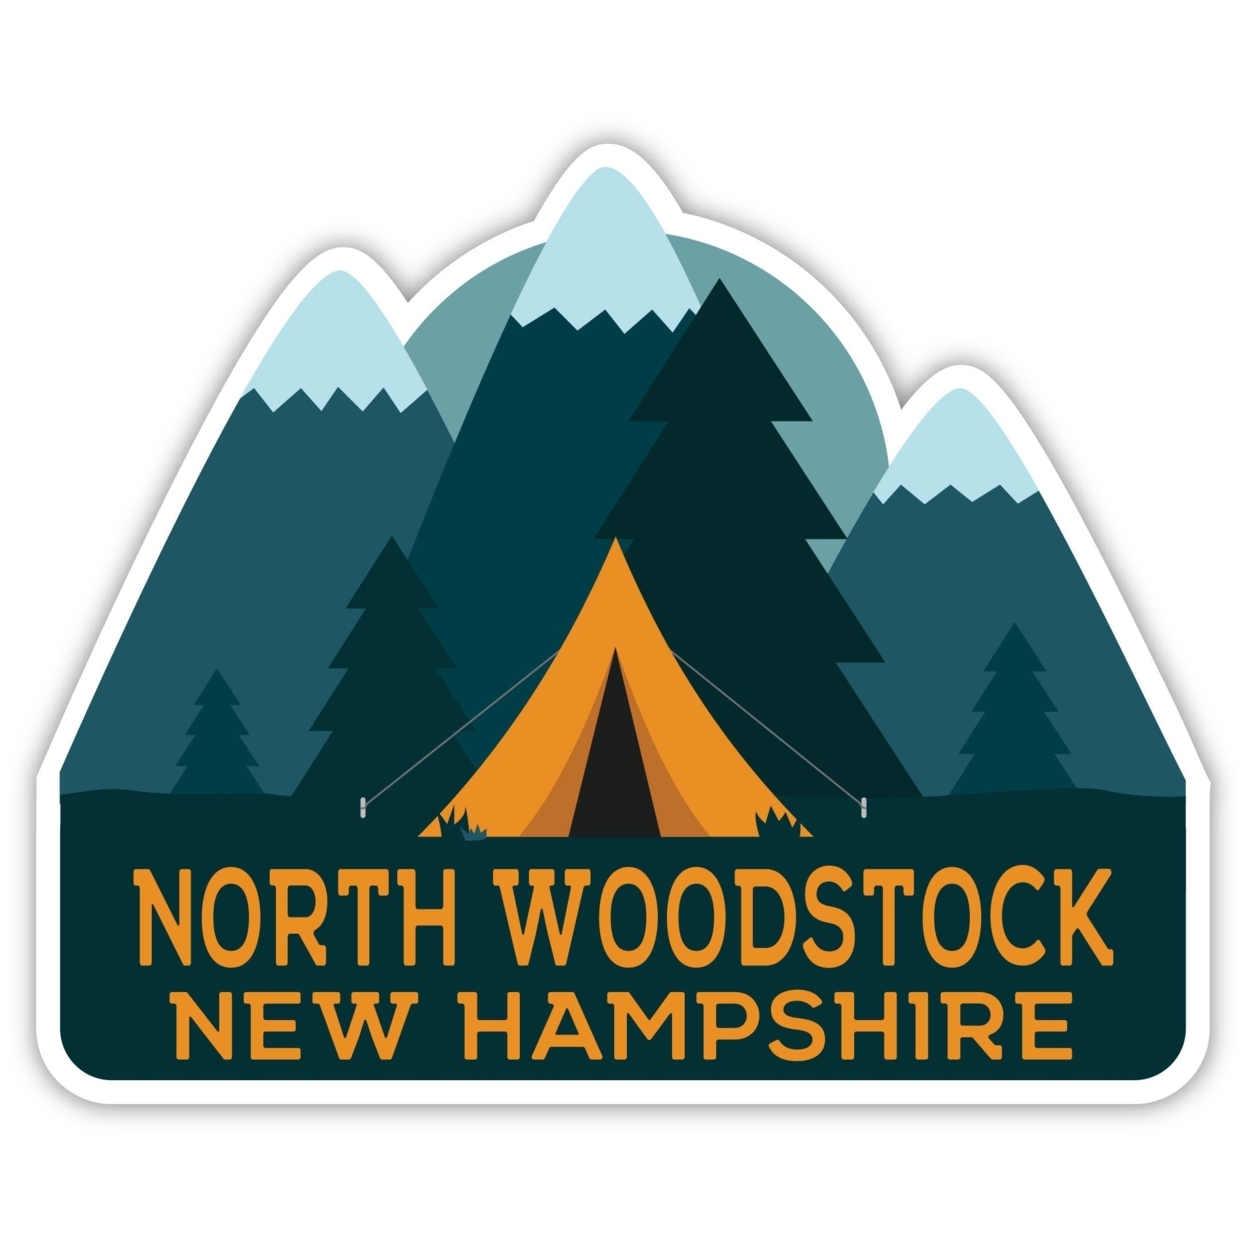 North Woodstock New Hampshire Souvenir Decorative Stickers (Choose Theme And Size) - Single Unit, 4-Inch, Tent